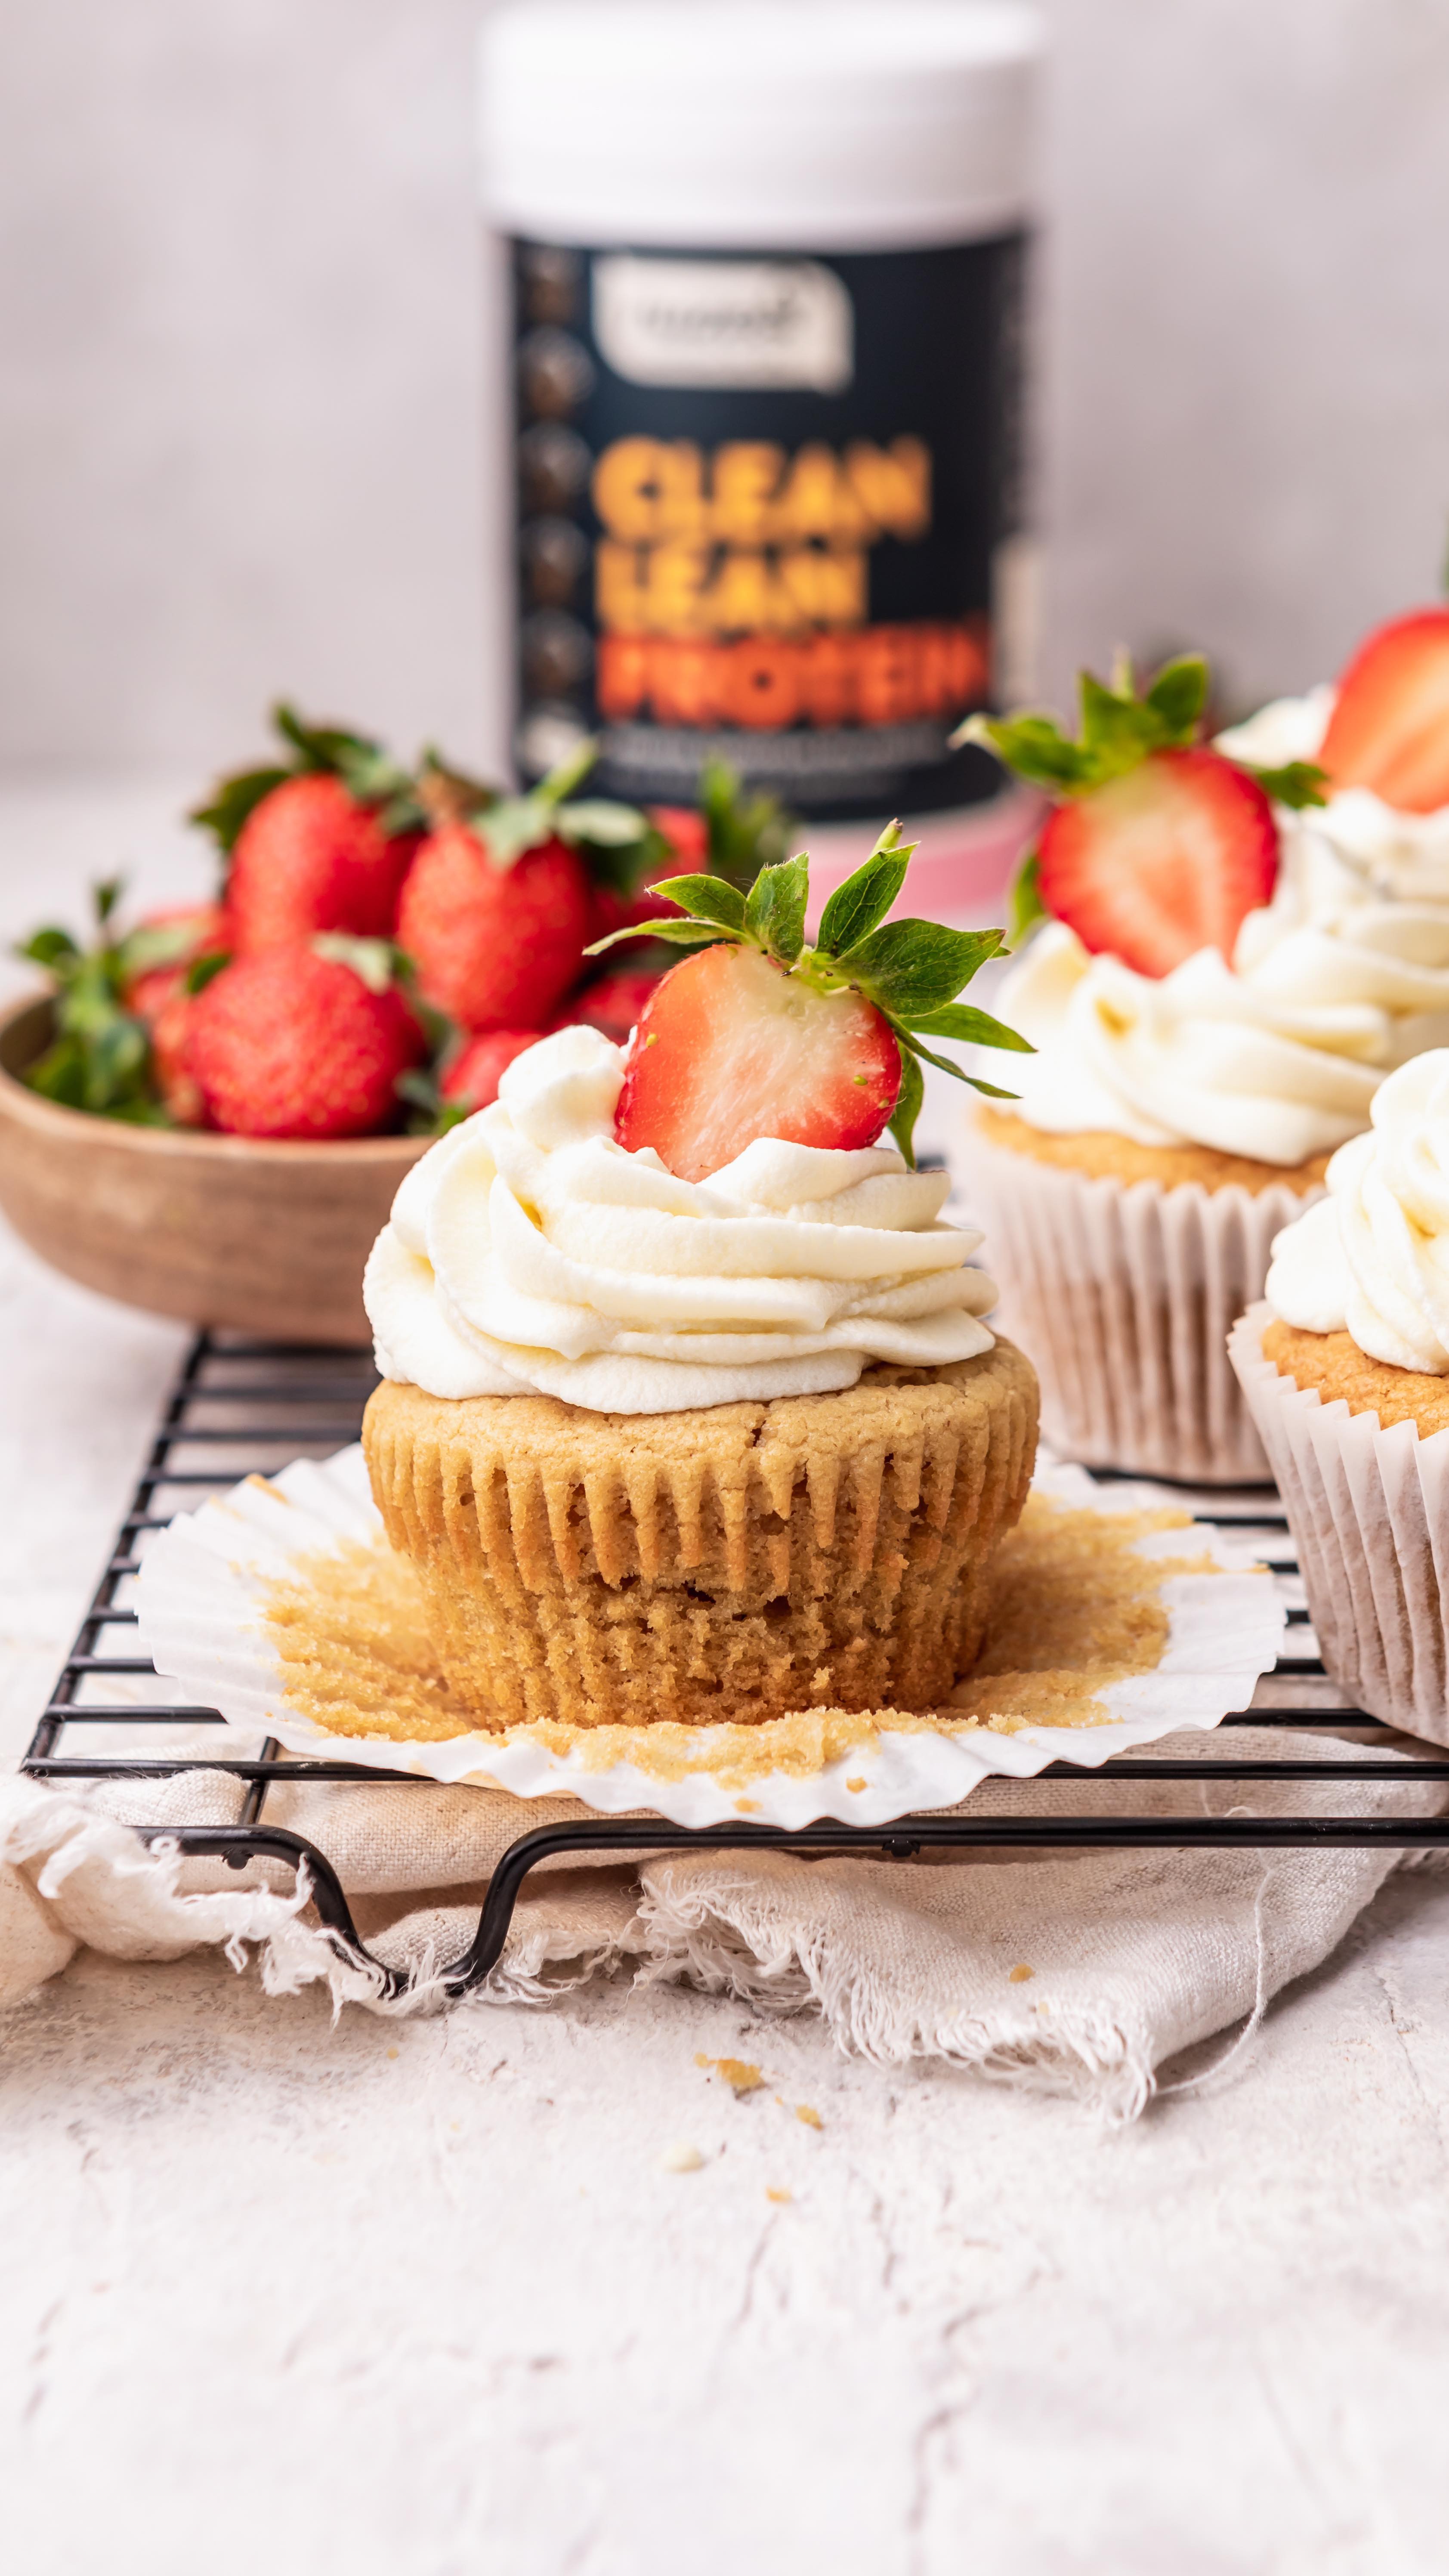 STRAWBERRIES AND CREAM CUPCAKES

I’ve had a well needed week off work and back with a bang with these delicious, fluffy vegan cupcakes. I’ve added extra protein powder so they contain 5g of protein per cupcake! Super easy for you to try. Hit SAVE to give these a go!

SERVES 8

INGREDIENTS

110g vegan blocks butter
120g caster sugar
200ml unsweetened almond milk
1 tbsp apple cider vinegar
1 tsp vanilla bean paste
150g plain flour
1 tsp baking powder
1 tsp baking soda
2 scoops Clean Lean Protein, wild strawberry
Frosting-
175g vegan block butter, room temperature
120g vegan cream cheese
260g icing sugar
8 strawberry slices

METHOD

1. Preheat the oven to 180°c fan. And line a muffin tin with 8 liners
2. Add the vinegar to the milk, stir and set aside.
3. Melt the butter and add to a mixing bowl with the sugar and whisk to combine.
4. Pour in the milk/vinegar mixture and whisk again.
5.  Add the vanilla paste, sift in the flour, baking powder, bicarbonate of soda and protein powder then stir until just combined.
6. Spoon evenly between the muffin liners then bake for around 25 minutes until risen and a skewer comes out clean when inserted into the centre.
7. Allow to cool fully on a wire rack.
8. Add the room temperature butter to a bowl and beat until paled and fluffy, add the cream cheese along with 1/4 of icing sugar and beat again, gradually adding more icing sugar until fully incorporated.
9. Spoon or pipe onto the cooled cupcakes and top with a sliced strawberry.
.
.
.
#vegancupcakes #veganprotein #strawberriesandcream